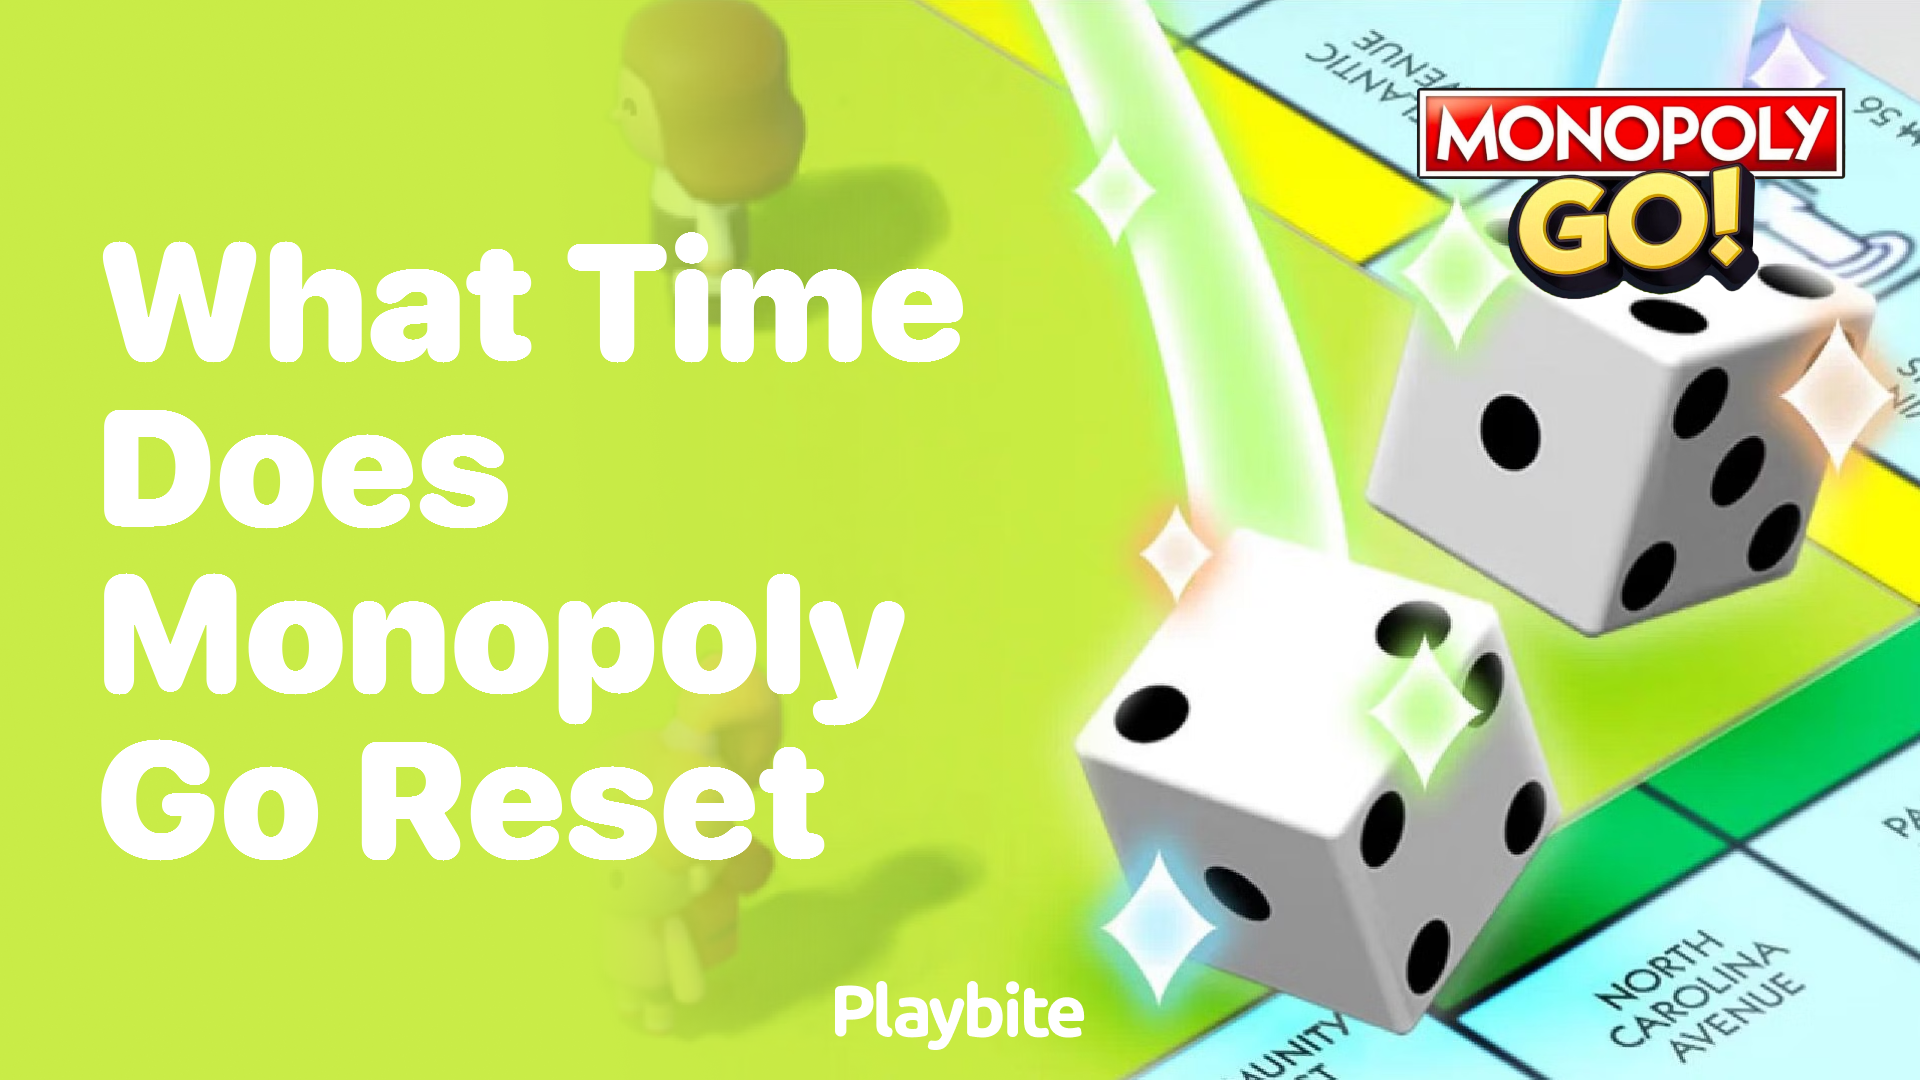 What Time Does Monopoly Go Reset? Find Out Here!